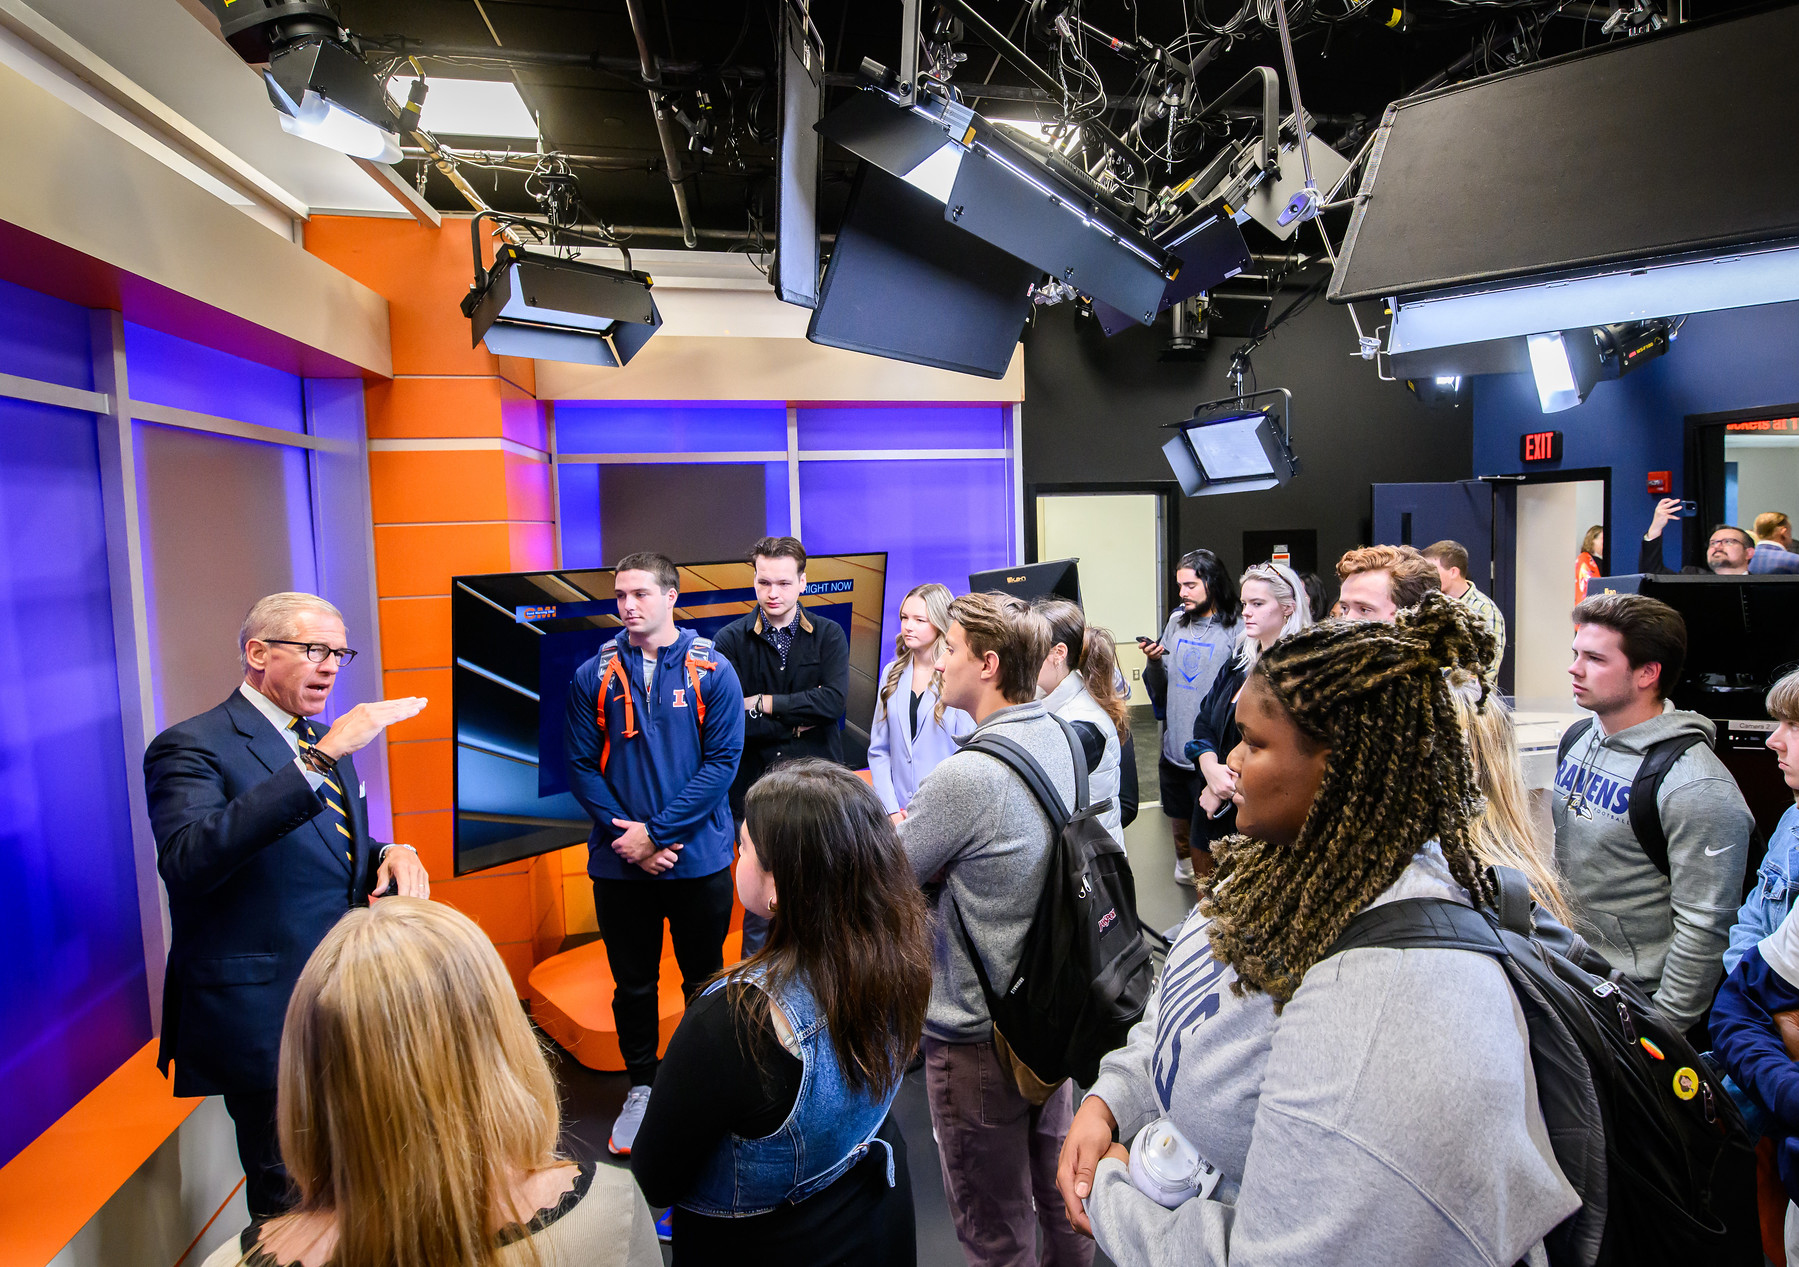 Brian Williams visits University of Illinois for the open house of the Frank Newsroom at Richmond Studio